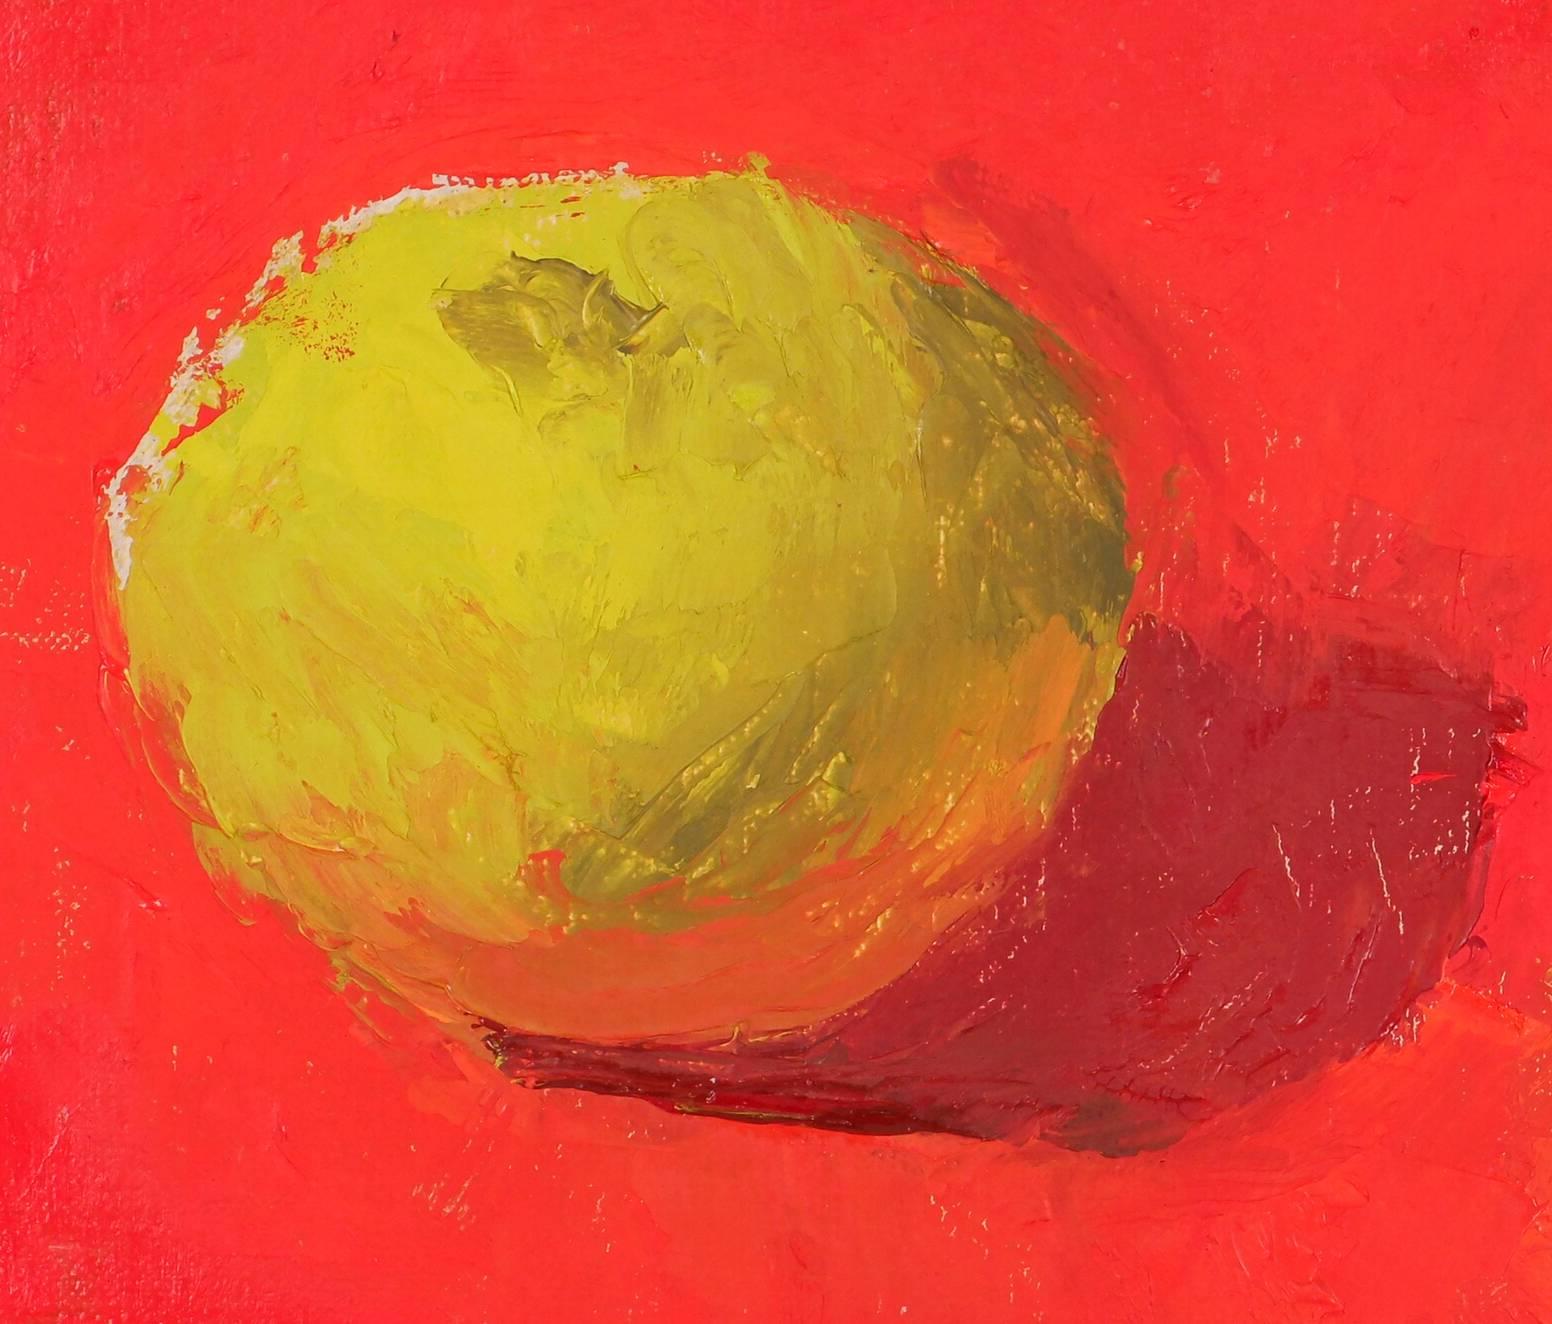 Apples on a Red Background - Painting by Rachel Newman